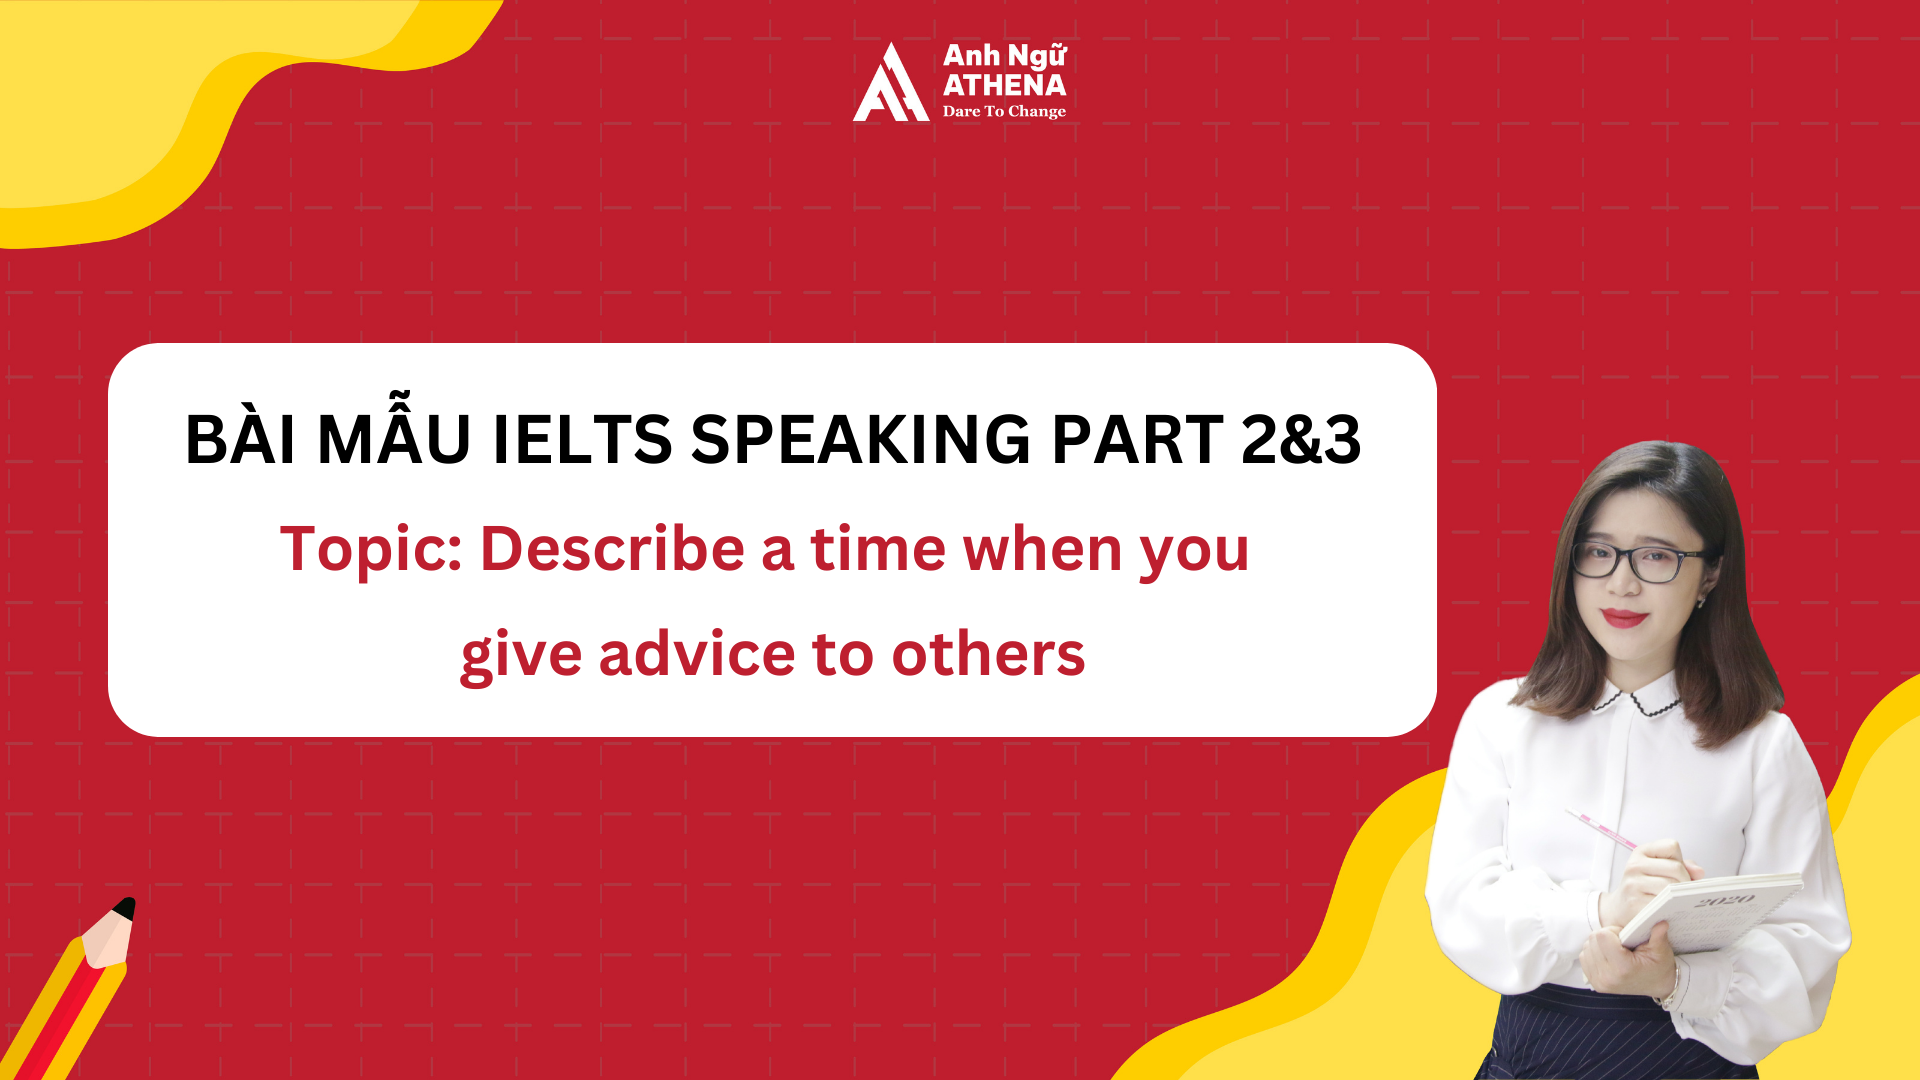 Bài mẫu IELTS Speaking Part 2 & 3 - Topic: Describe a time when you give advice to others